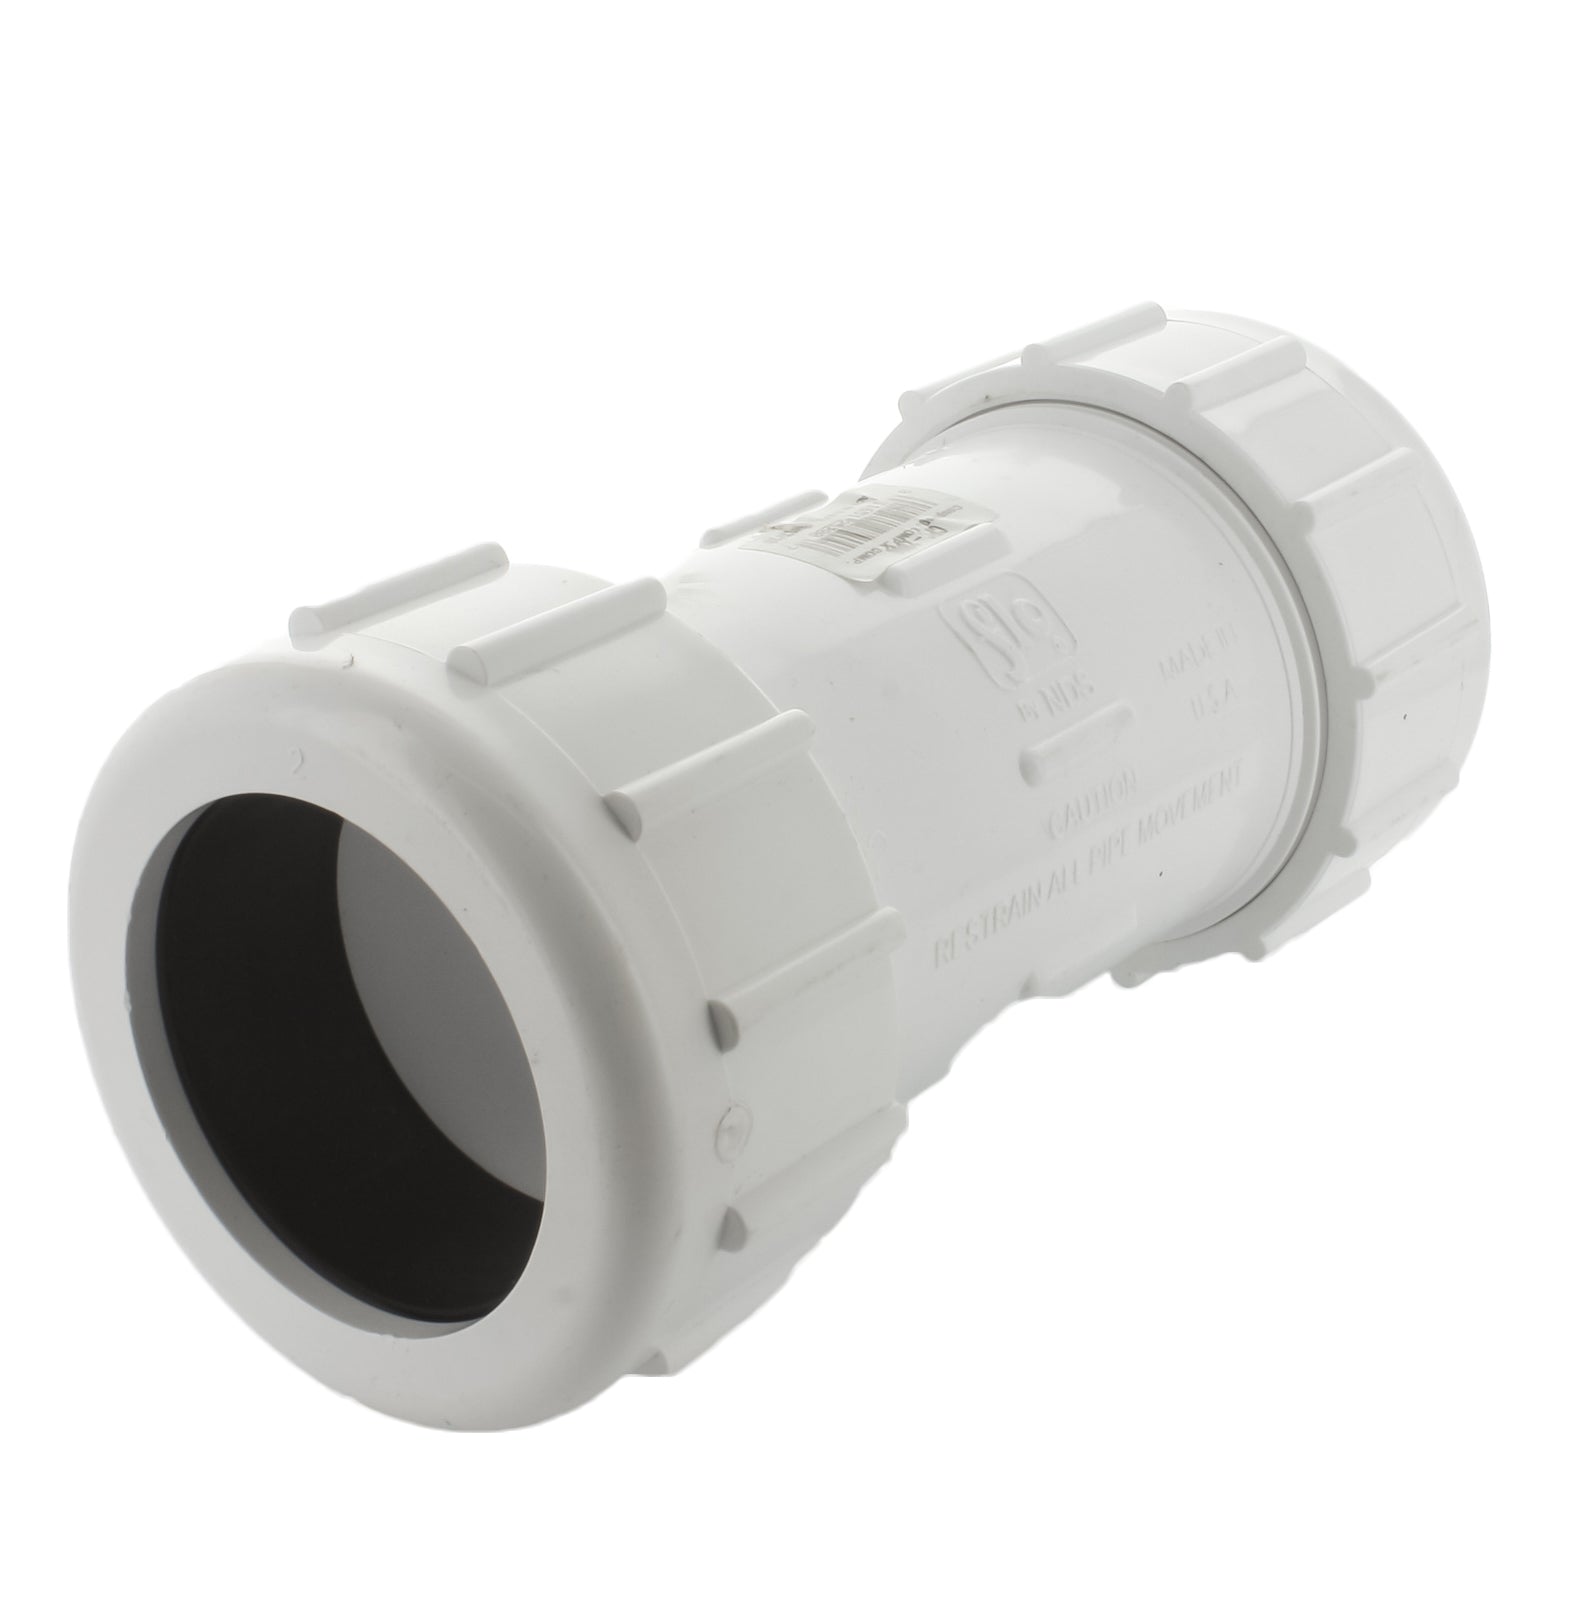 110-15 - 1 1/2 in. PVC Compression Coupling